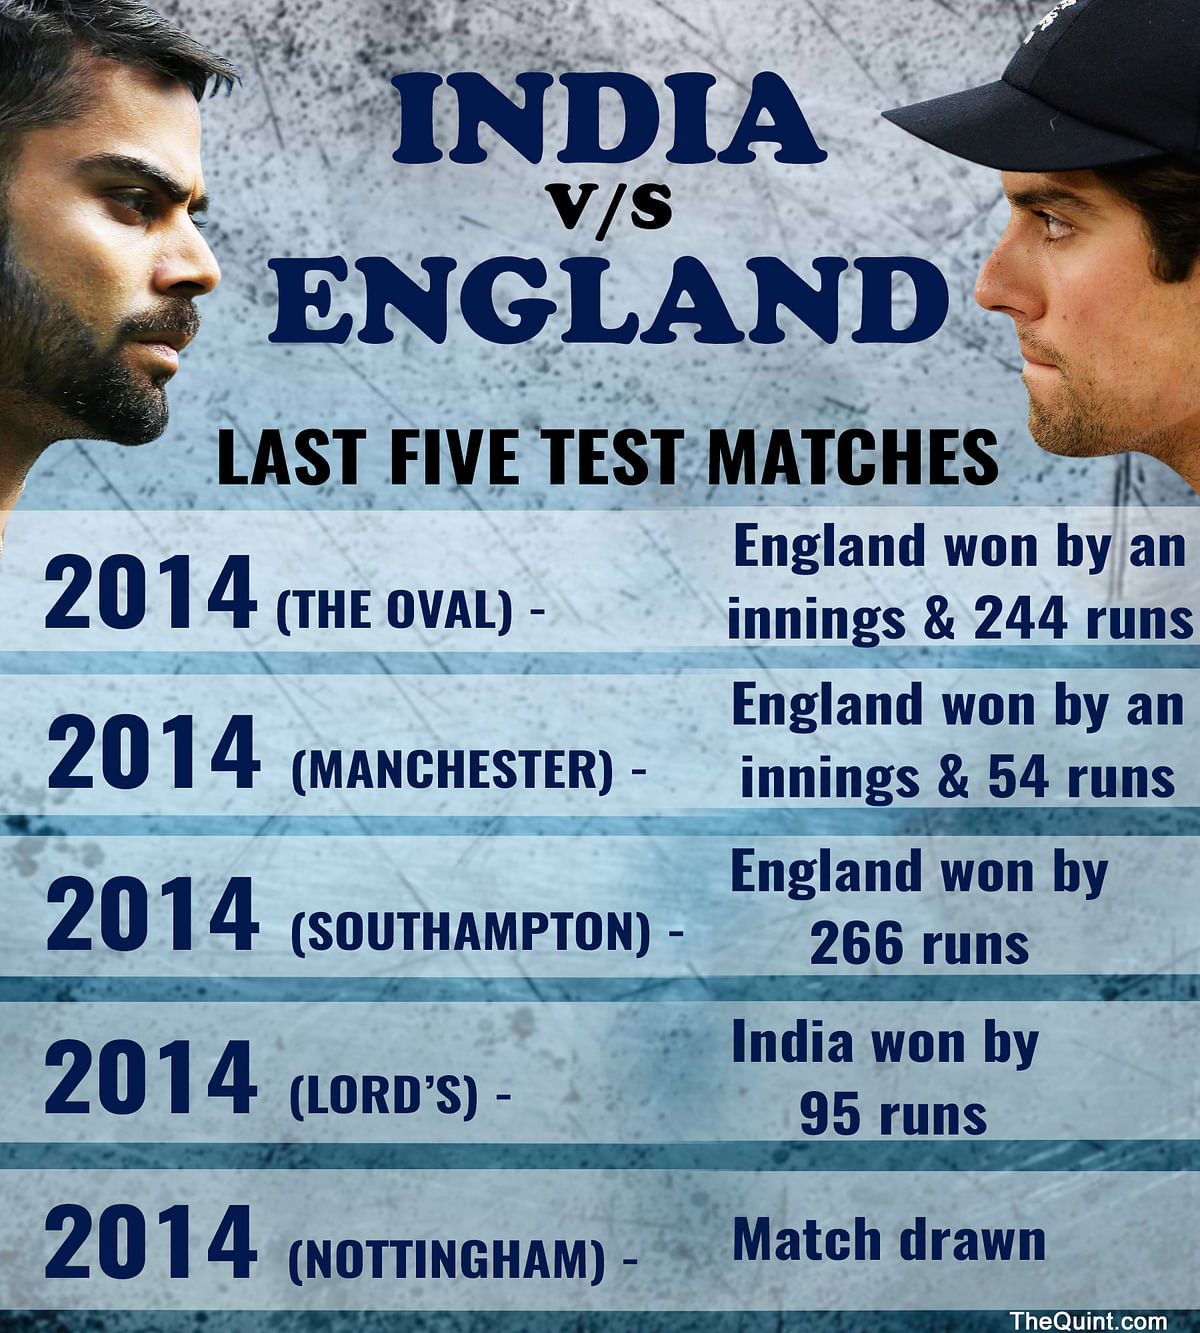 England were the last team to beat India in a Test series at home, in 2012.